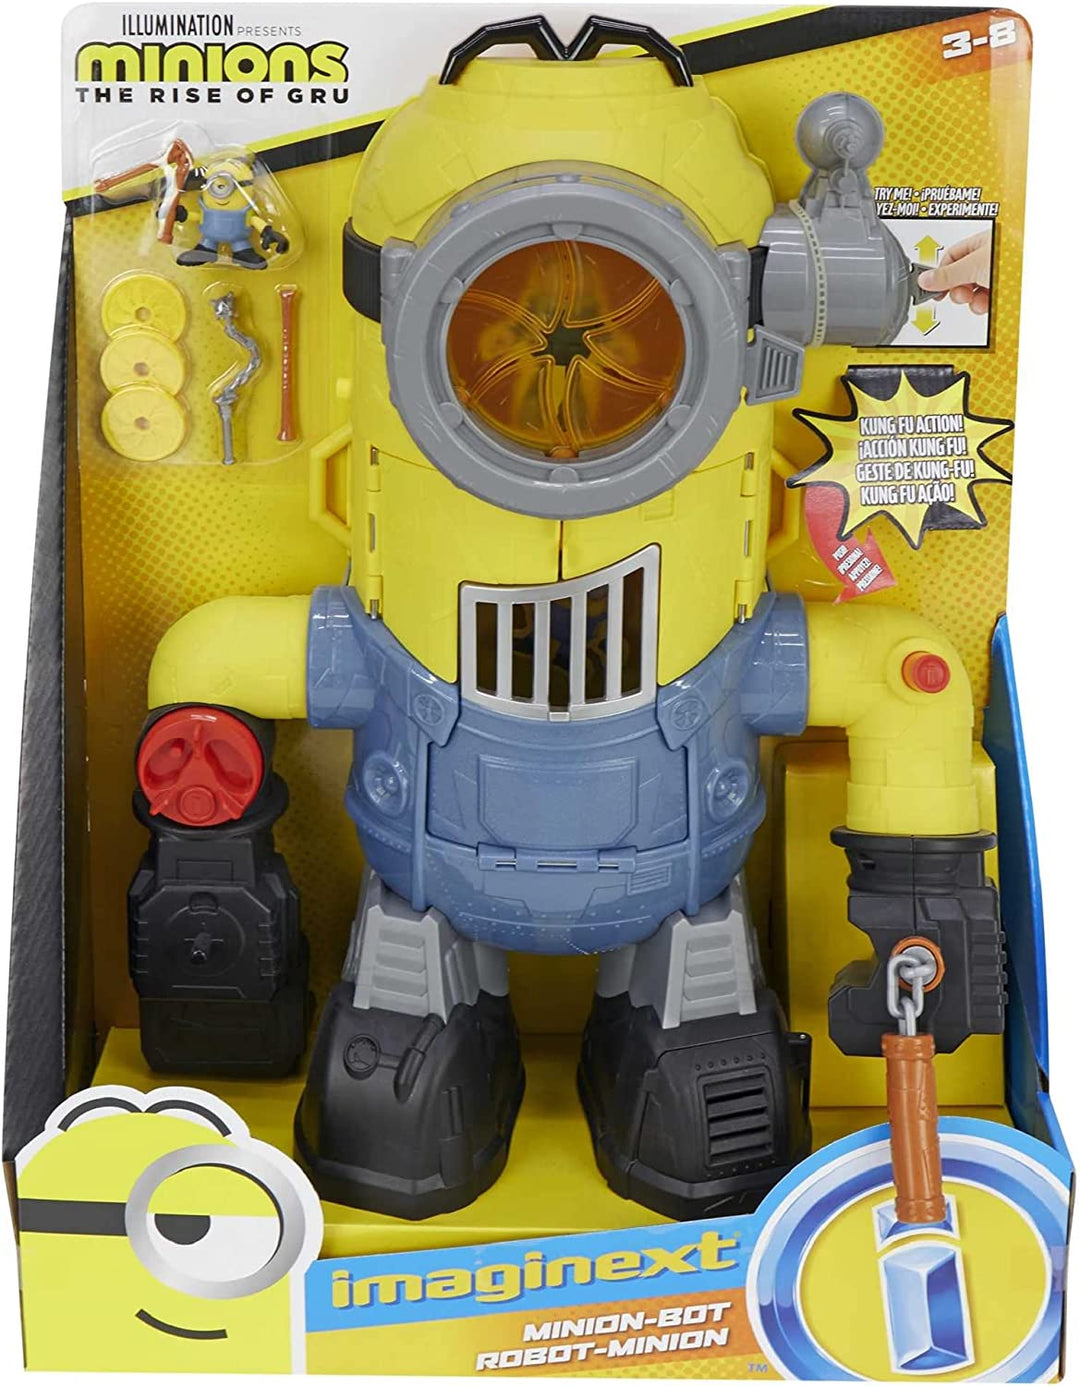 Fisher-Price Imaginext Minions MinionBot, Robot and Playset with Punching Action